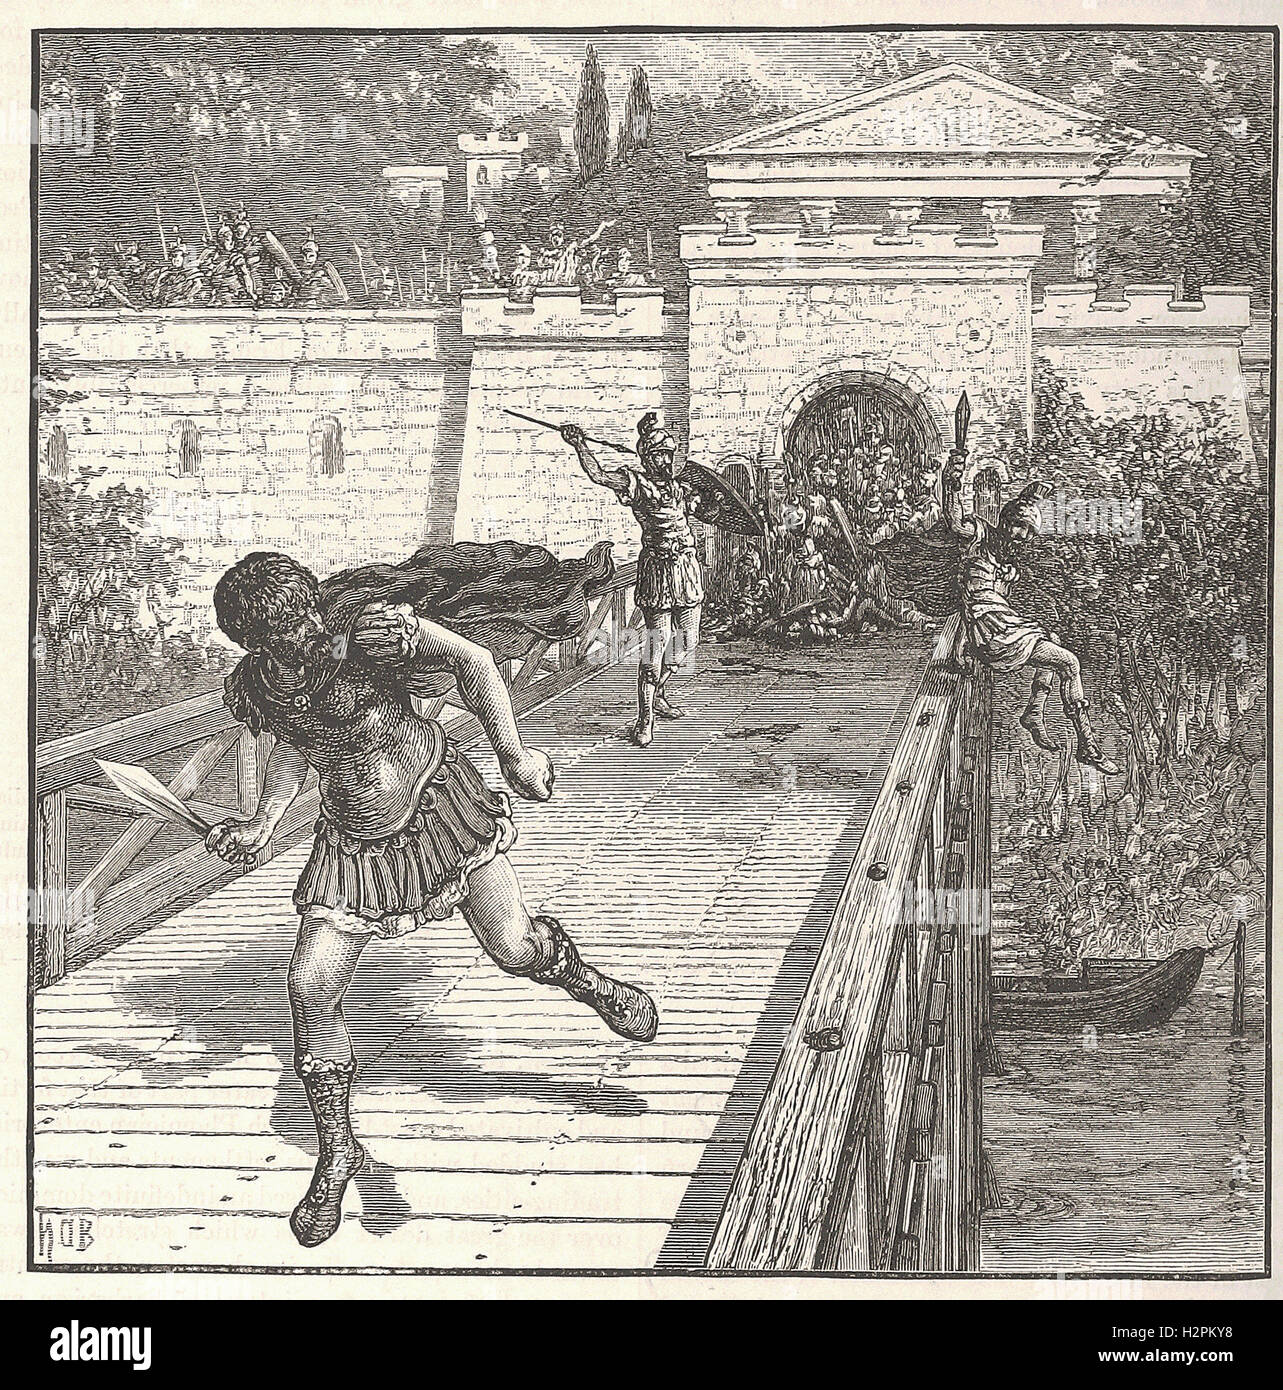 THE FLIGHT OF CAIUS GRACCHUS - from 'Cassell's Illustrated Universal History' - 1882 Stock Photo